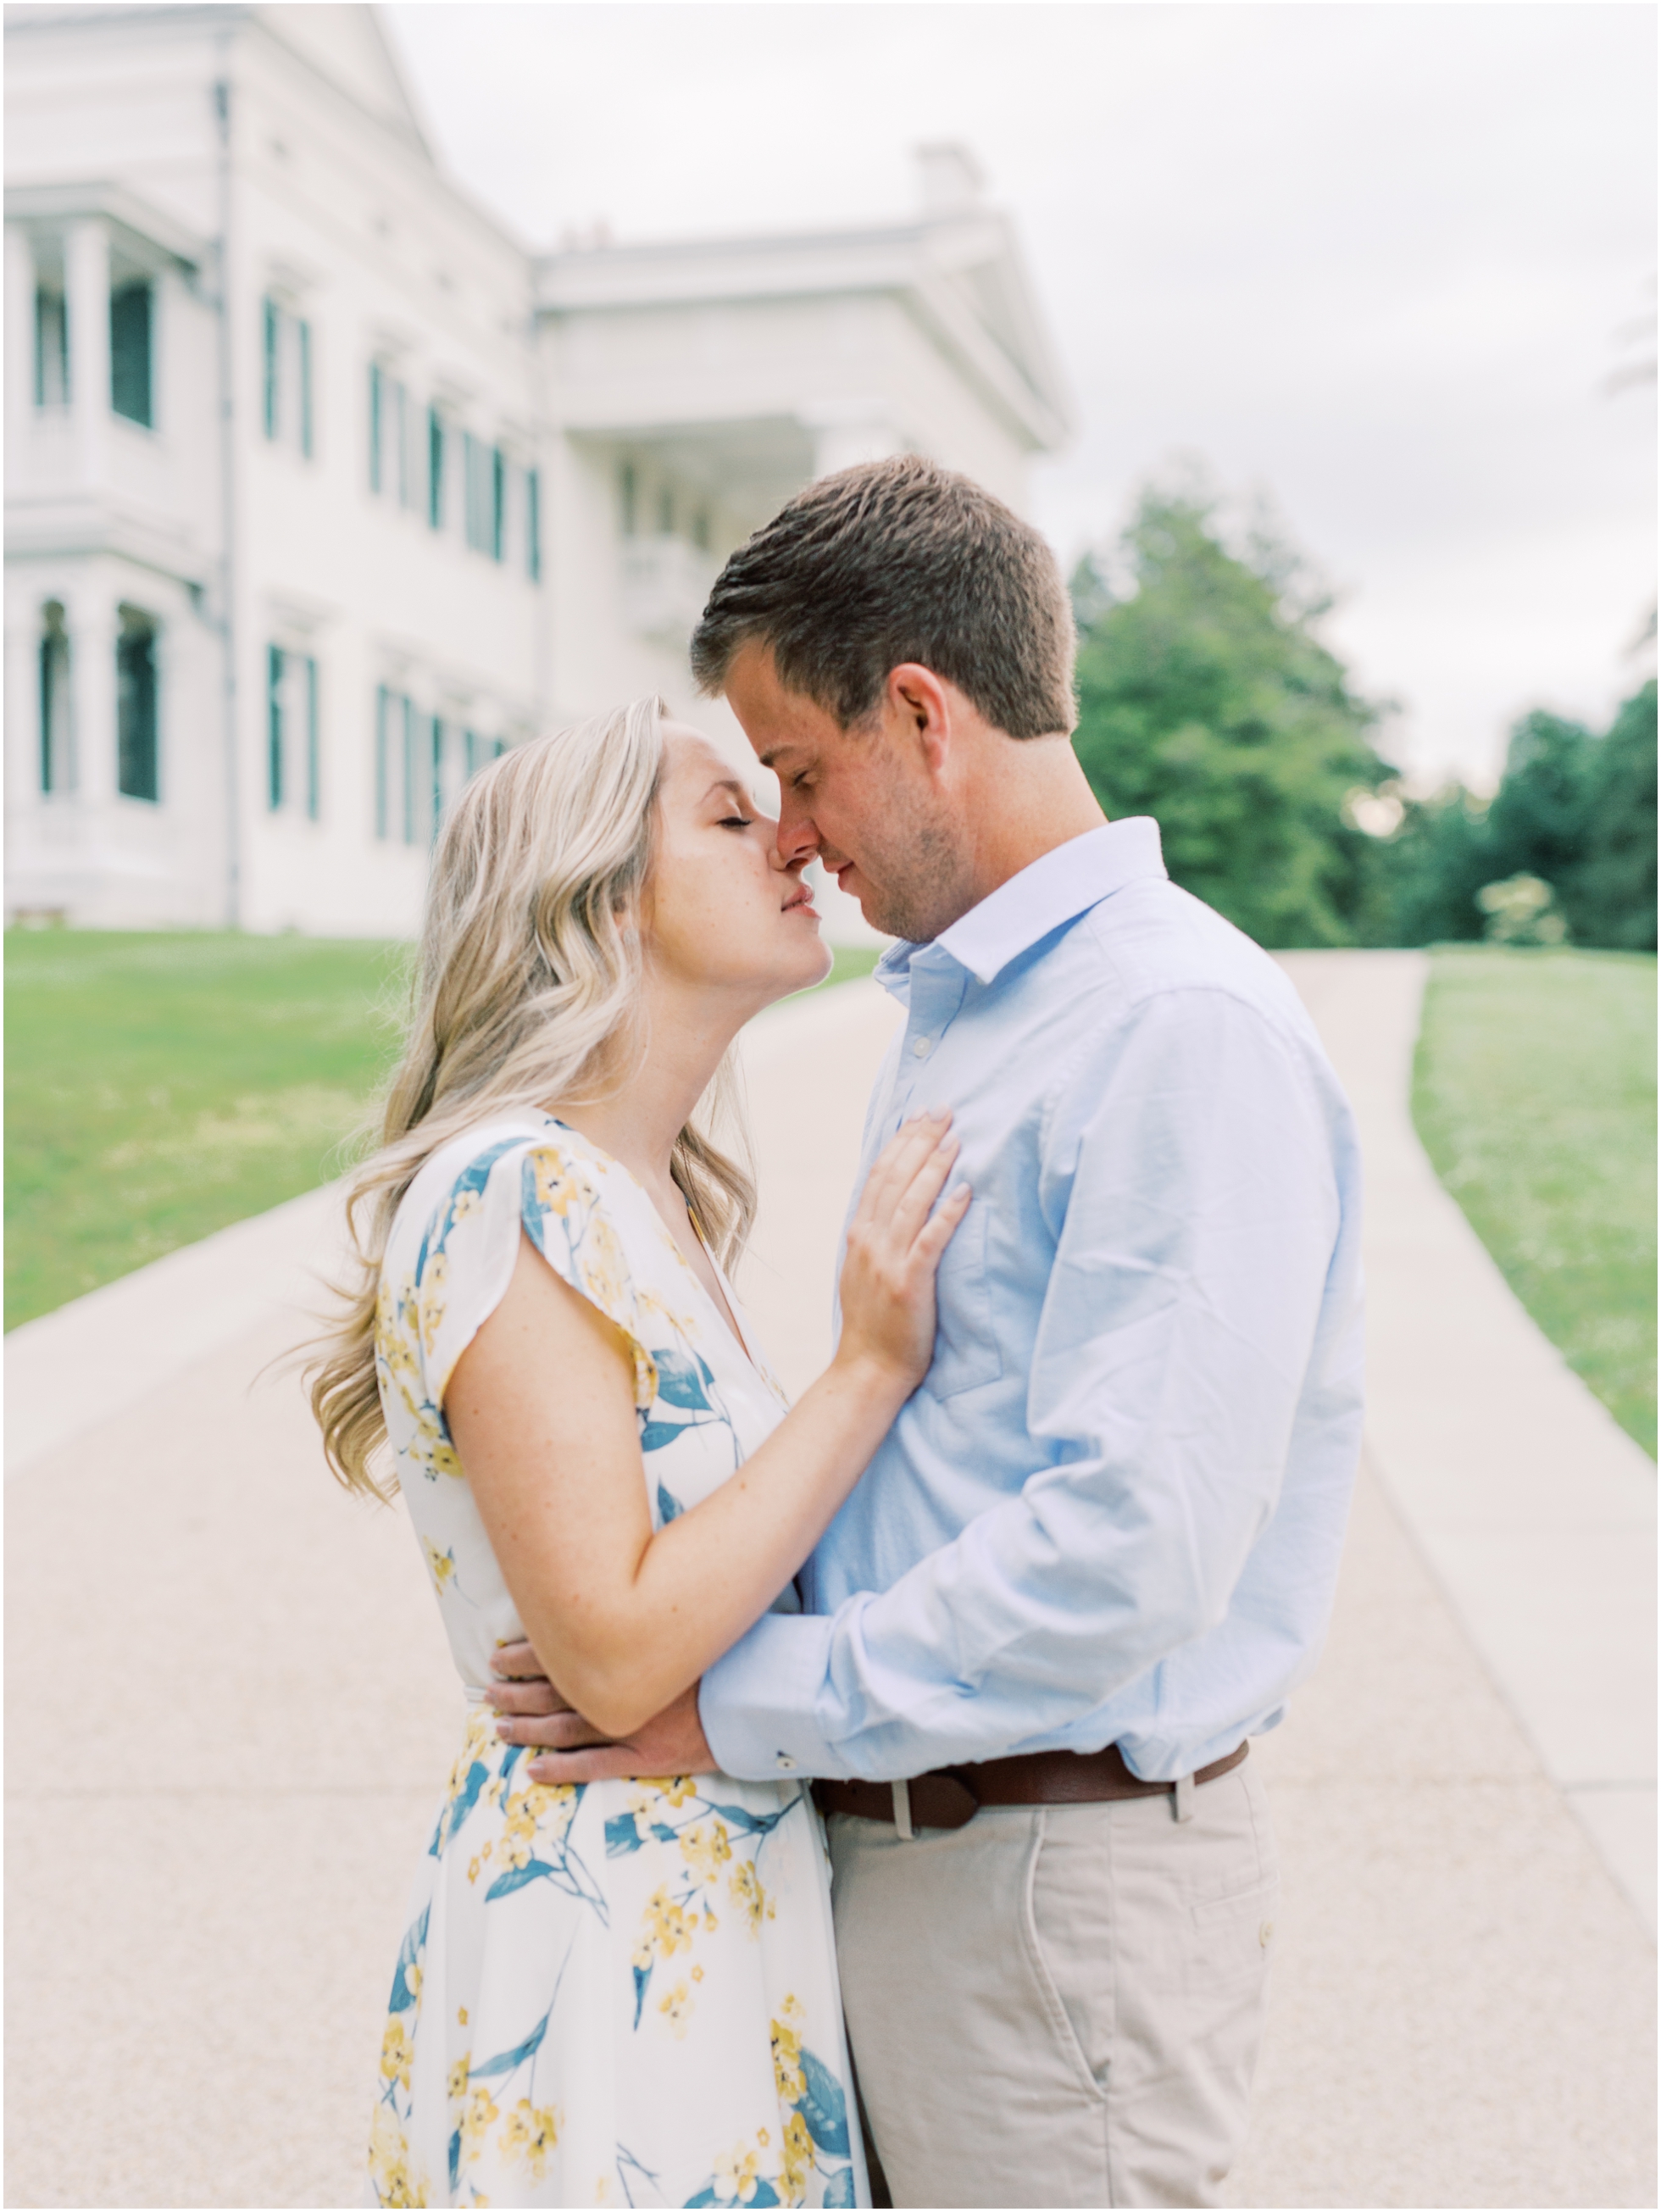 Gorgeous Sunrise Engagement Session at Morven Park in May 